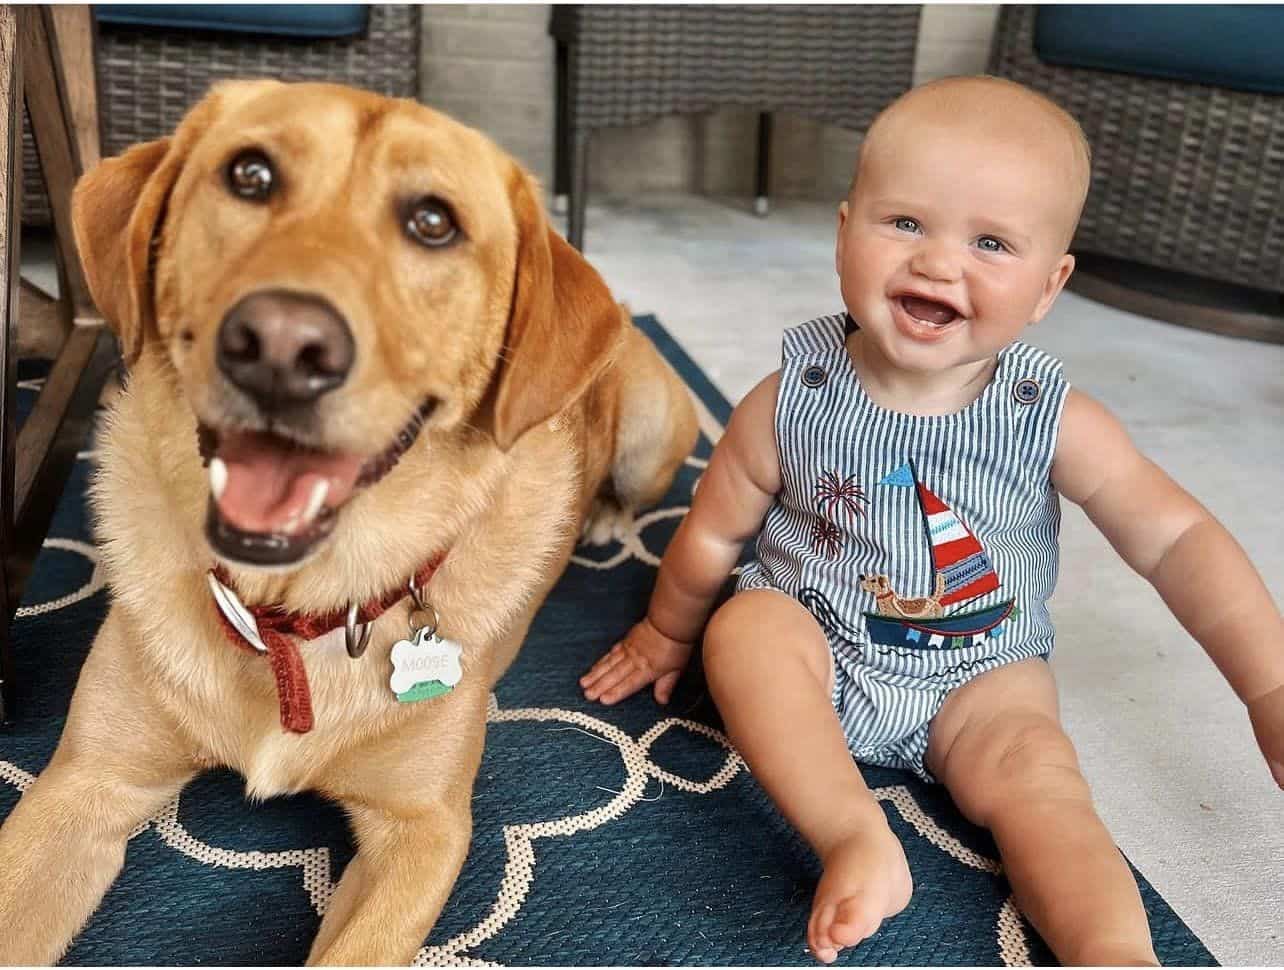 Scotty McCreery's son, Avery, with his dog, Moose